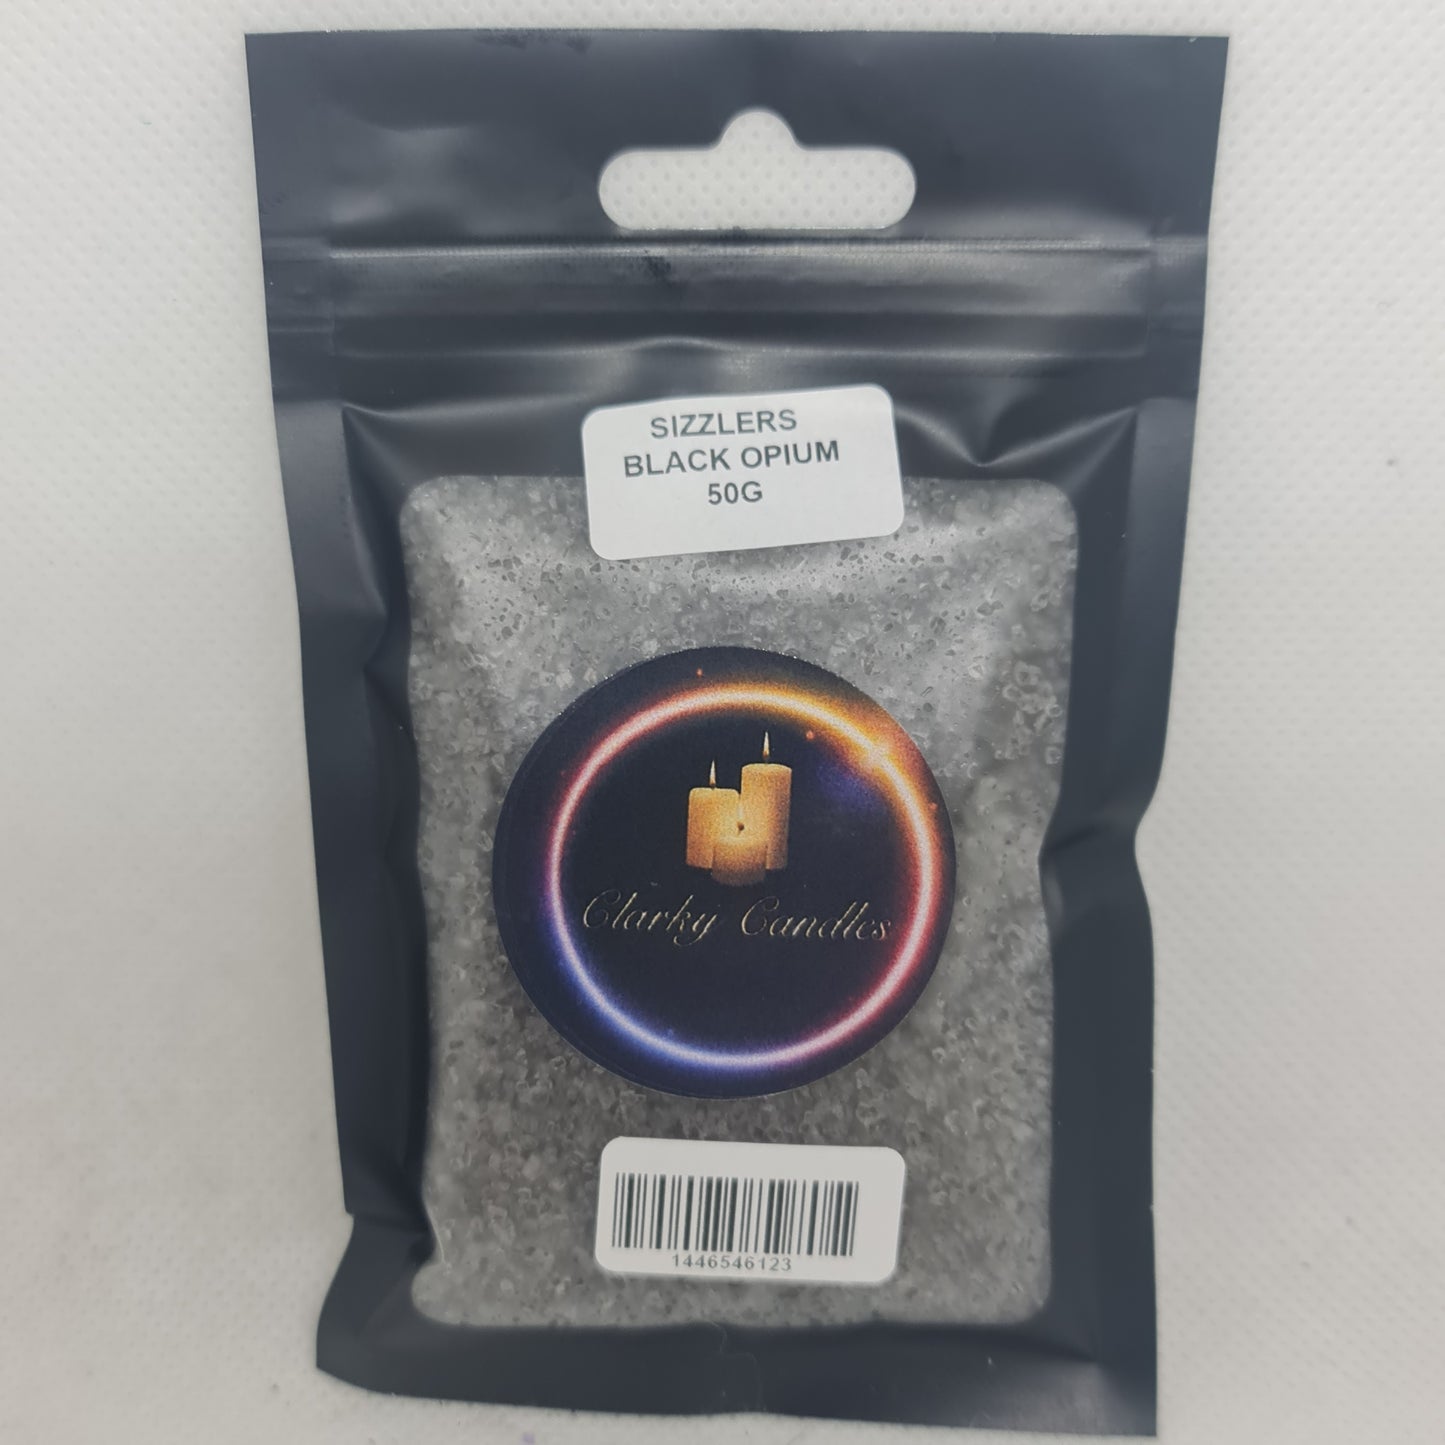 Black Opium - 50g - Scented Sizzlers